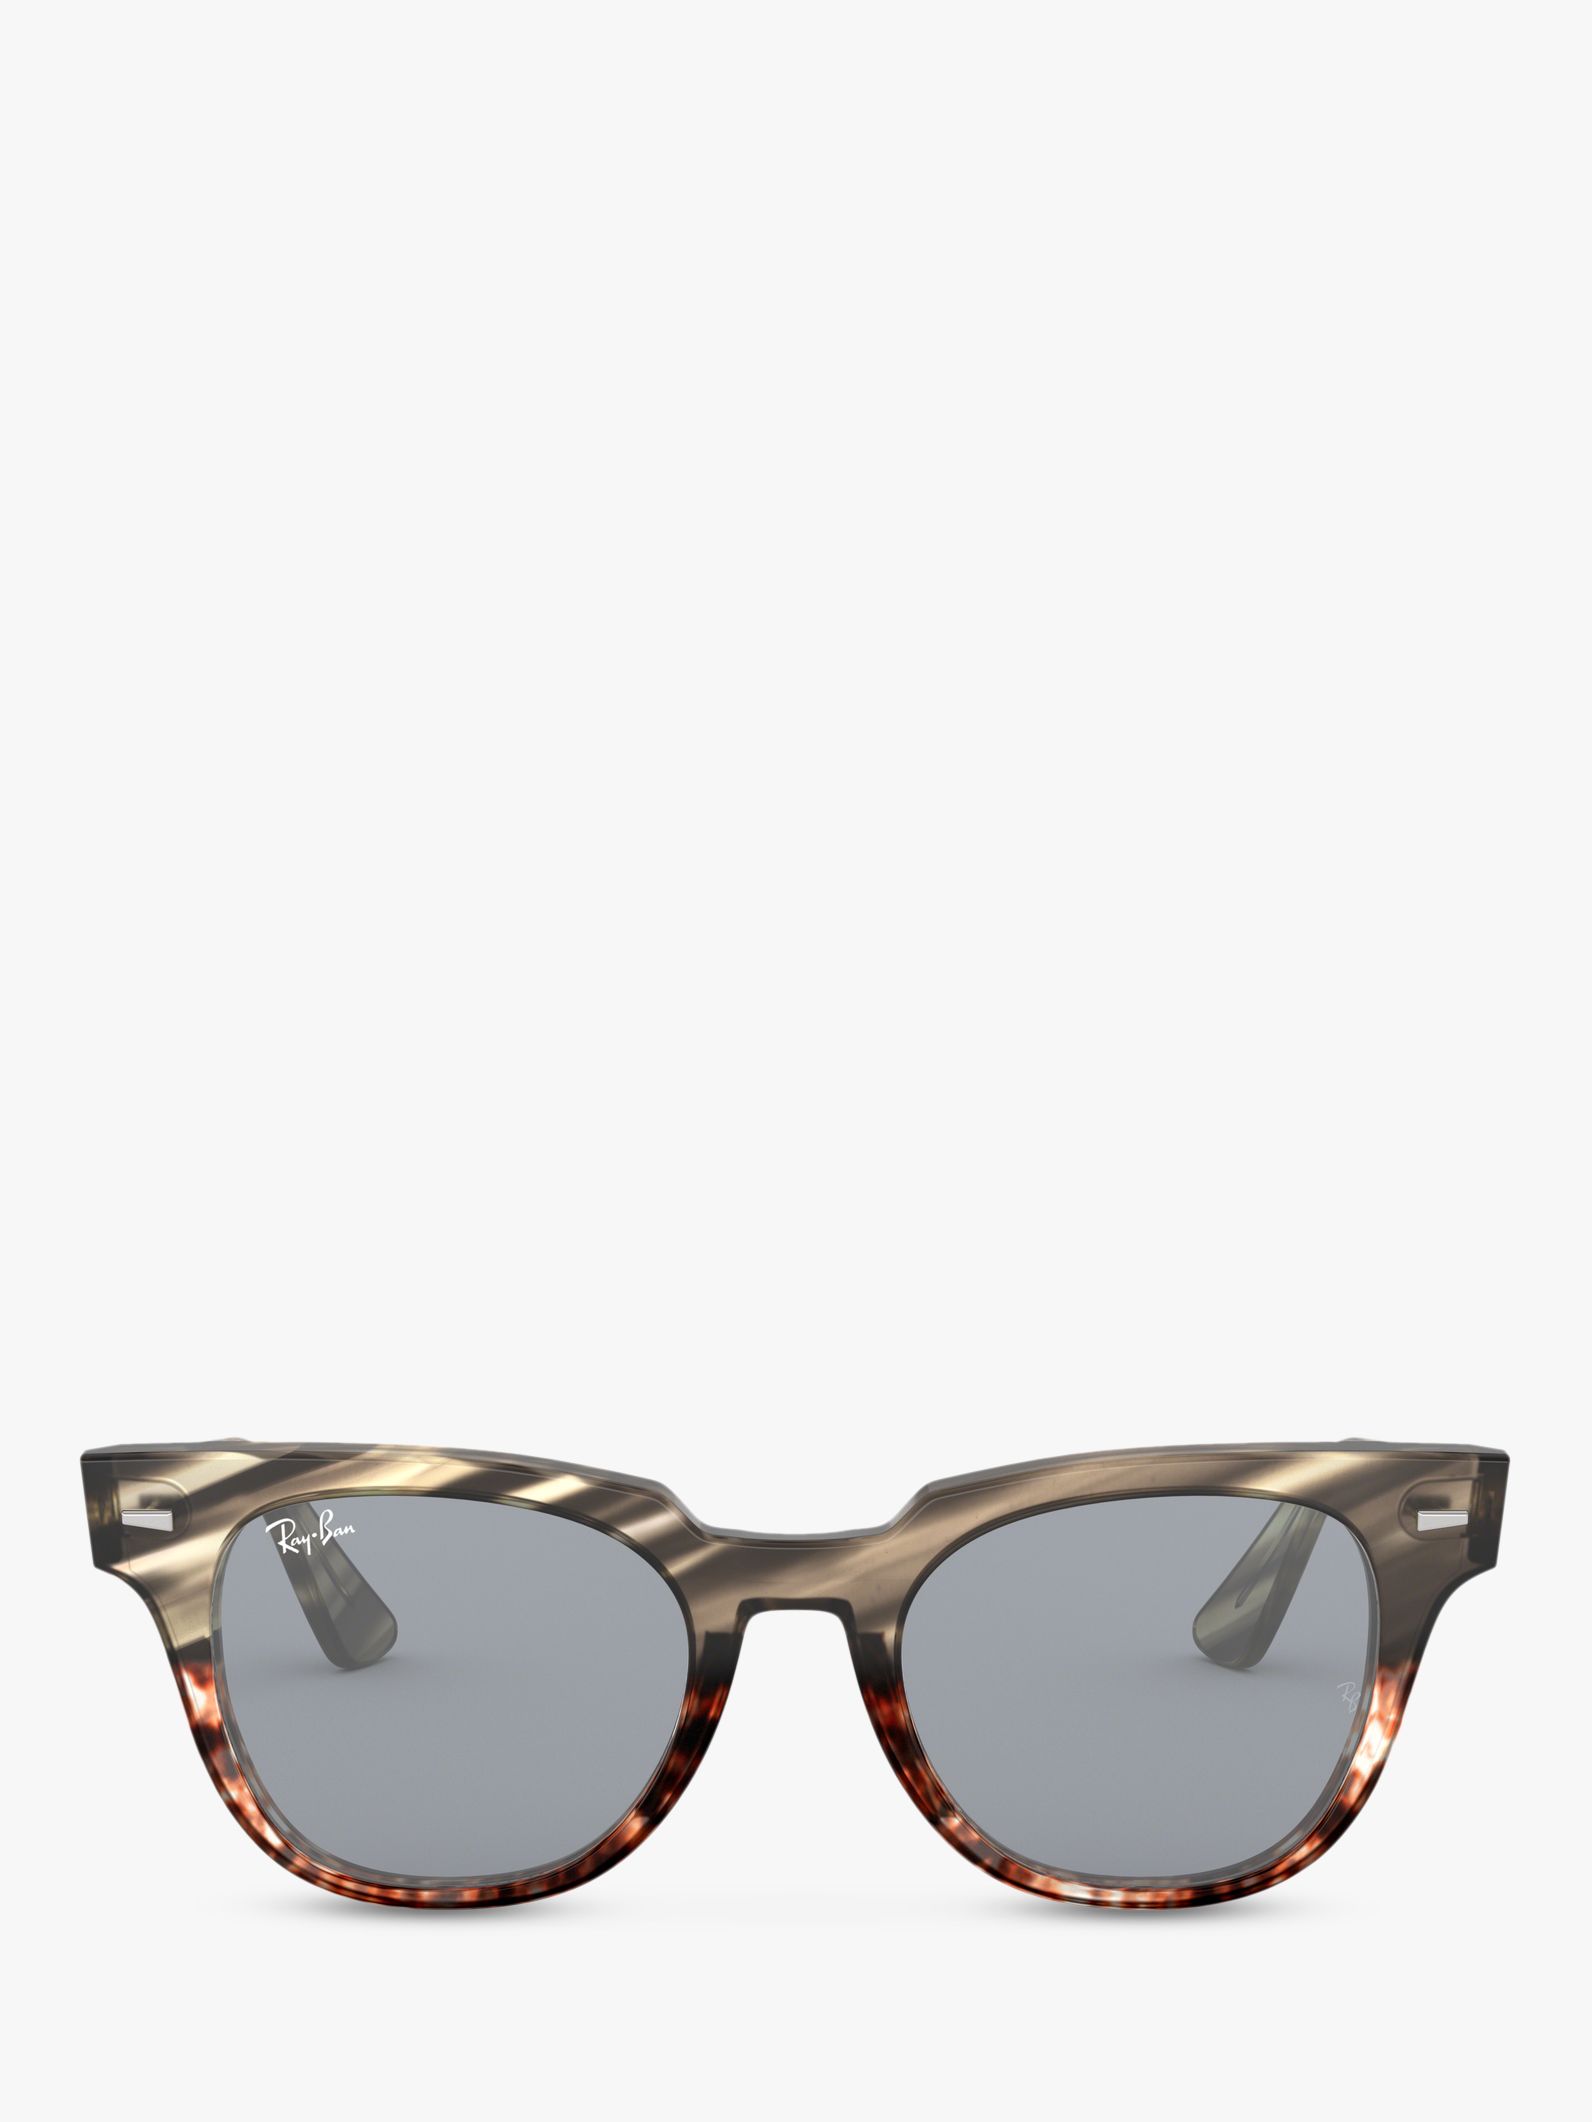 Ray-Ban RB2168 Unisex Square Sunglasses, Brown Striped/Grey Gradient